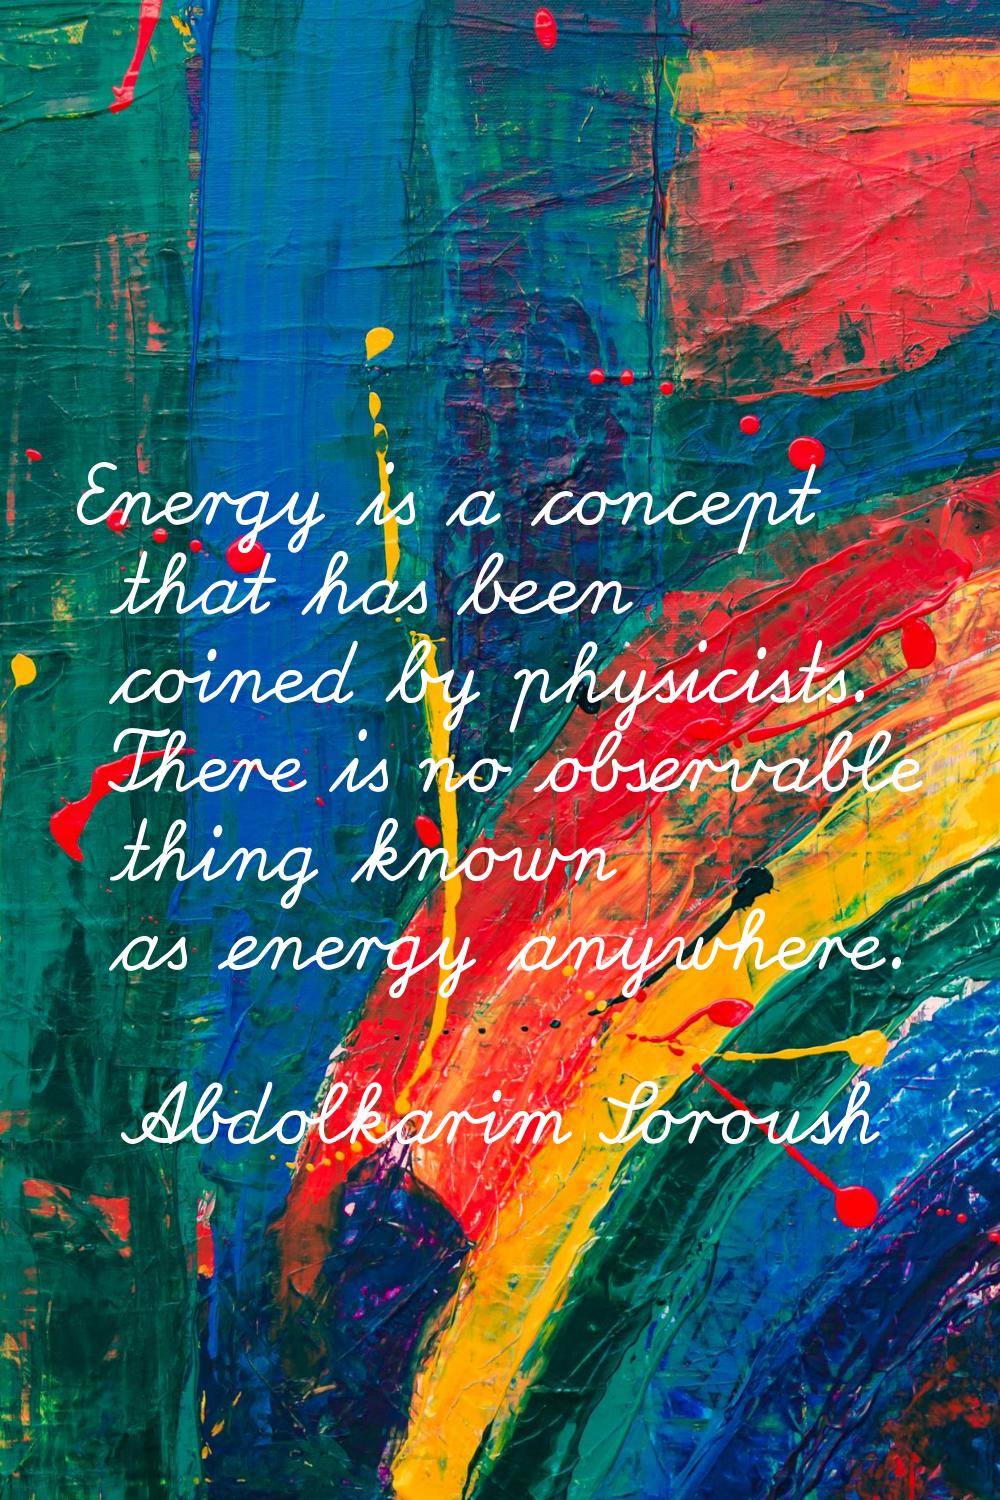 Energy is a concept that has been coined by physicists. There is no observable thing known as energ